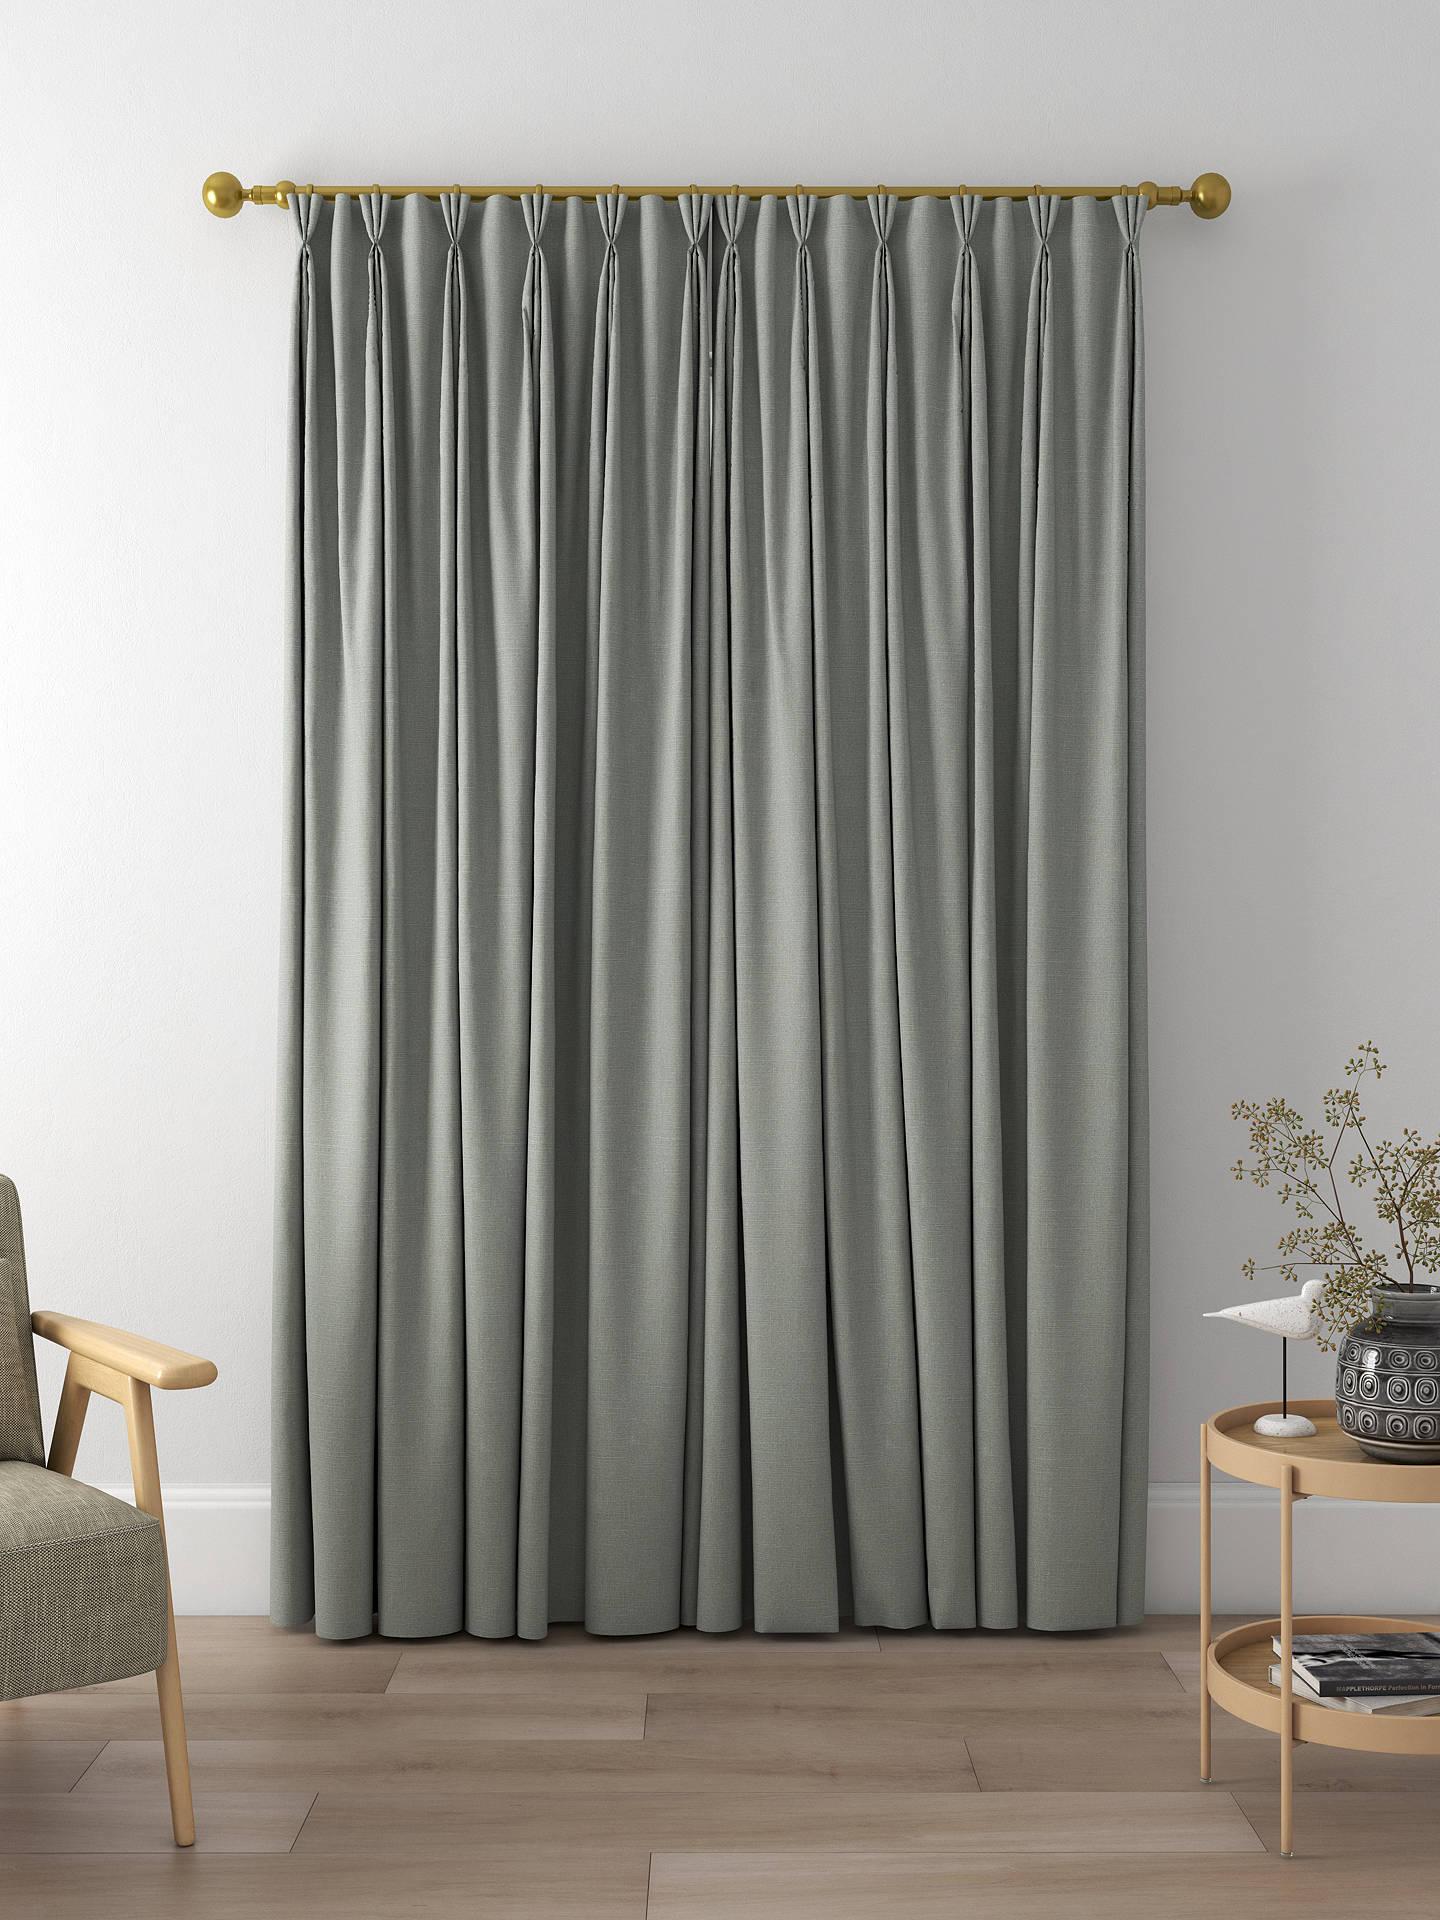 Sanderson Tuscany II Made to Measure Curtains, Wren Feather